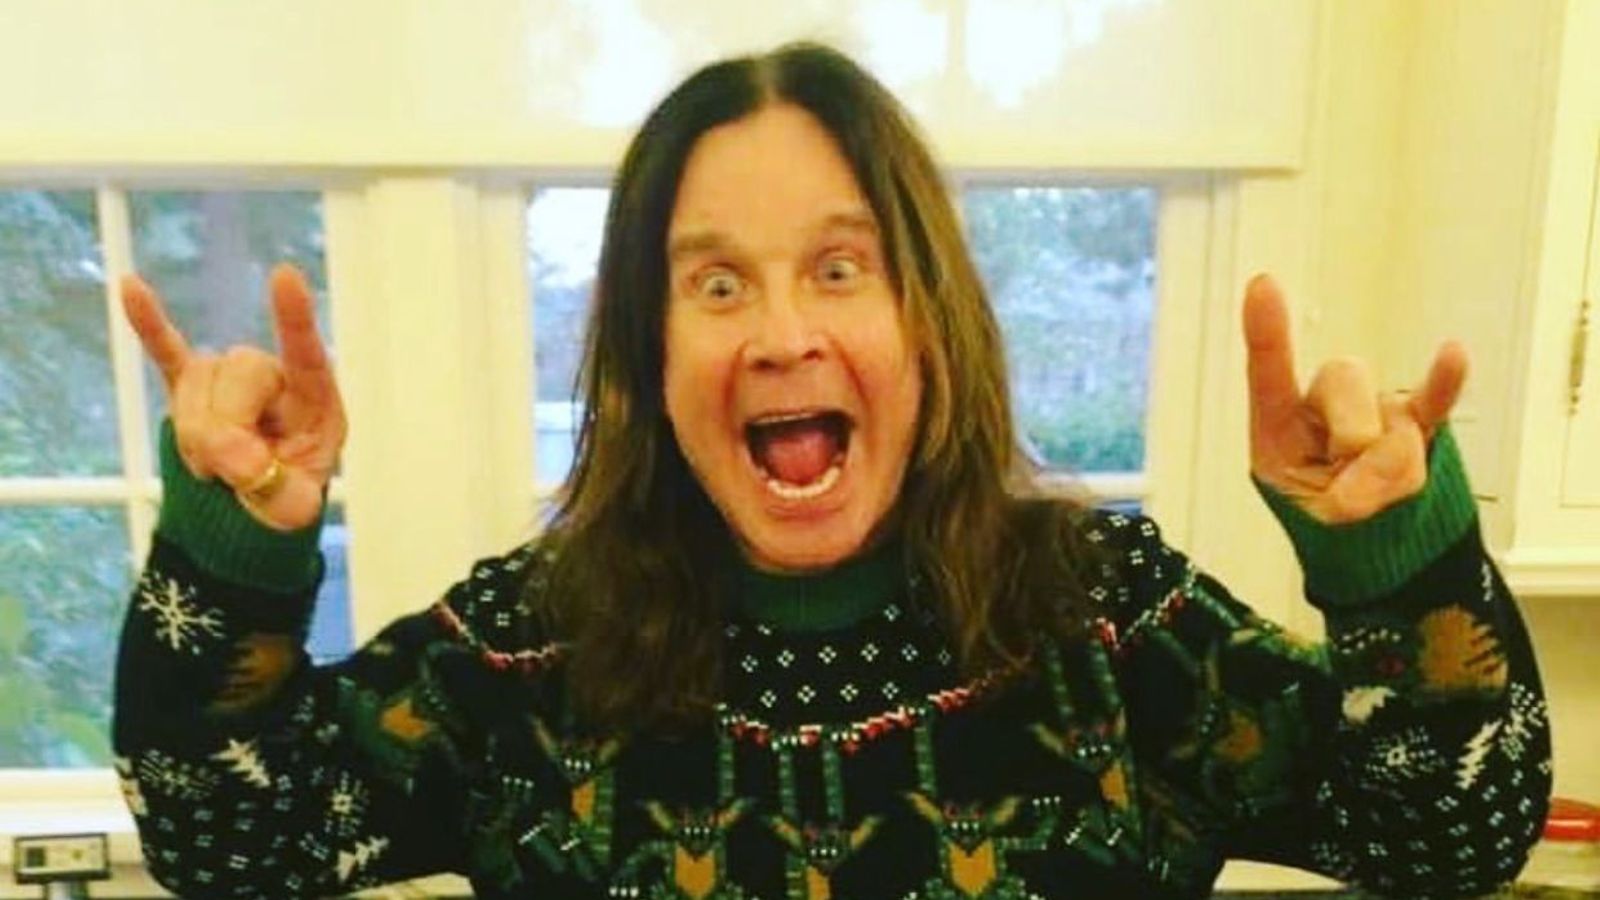 Ozzy Osbourne and Noddy Holder lend their voices for cancer charity's Christmas song